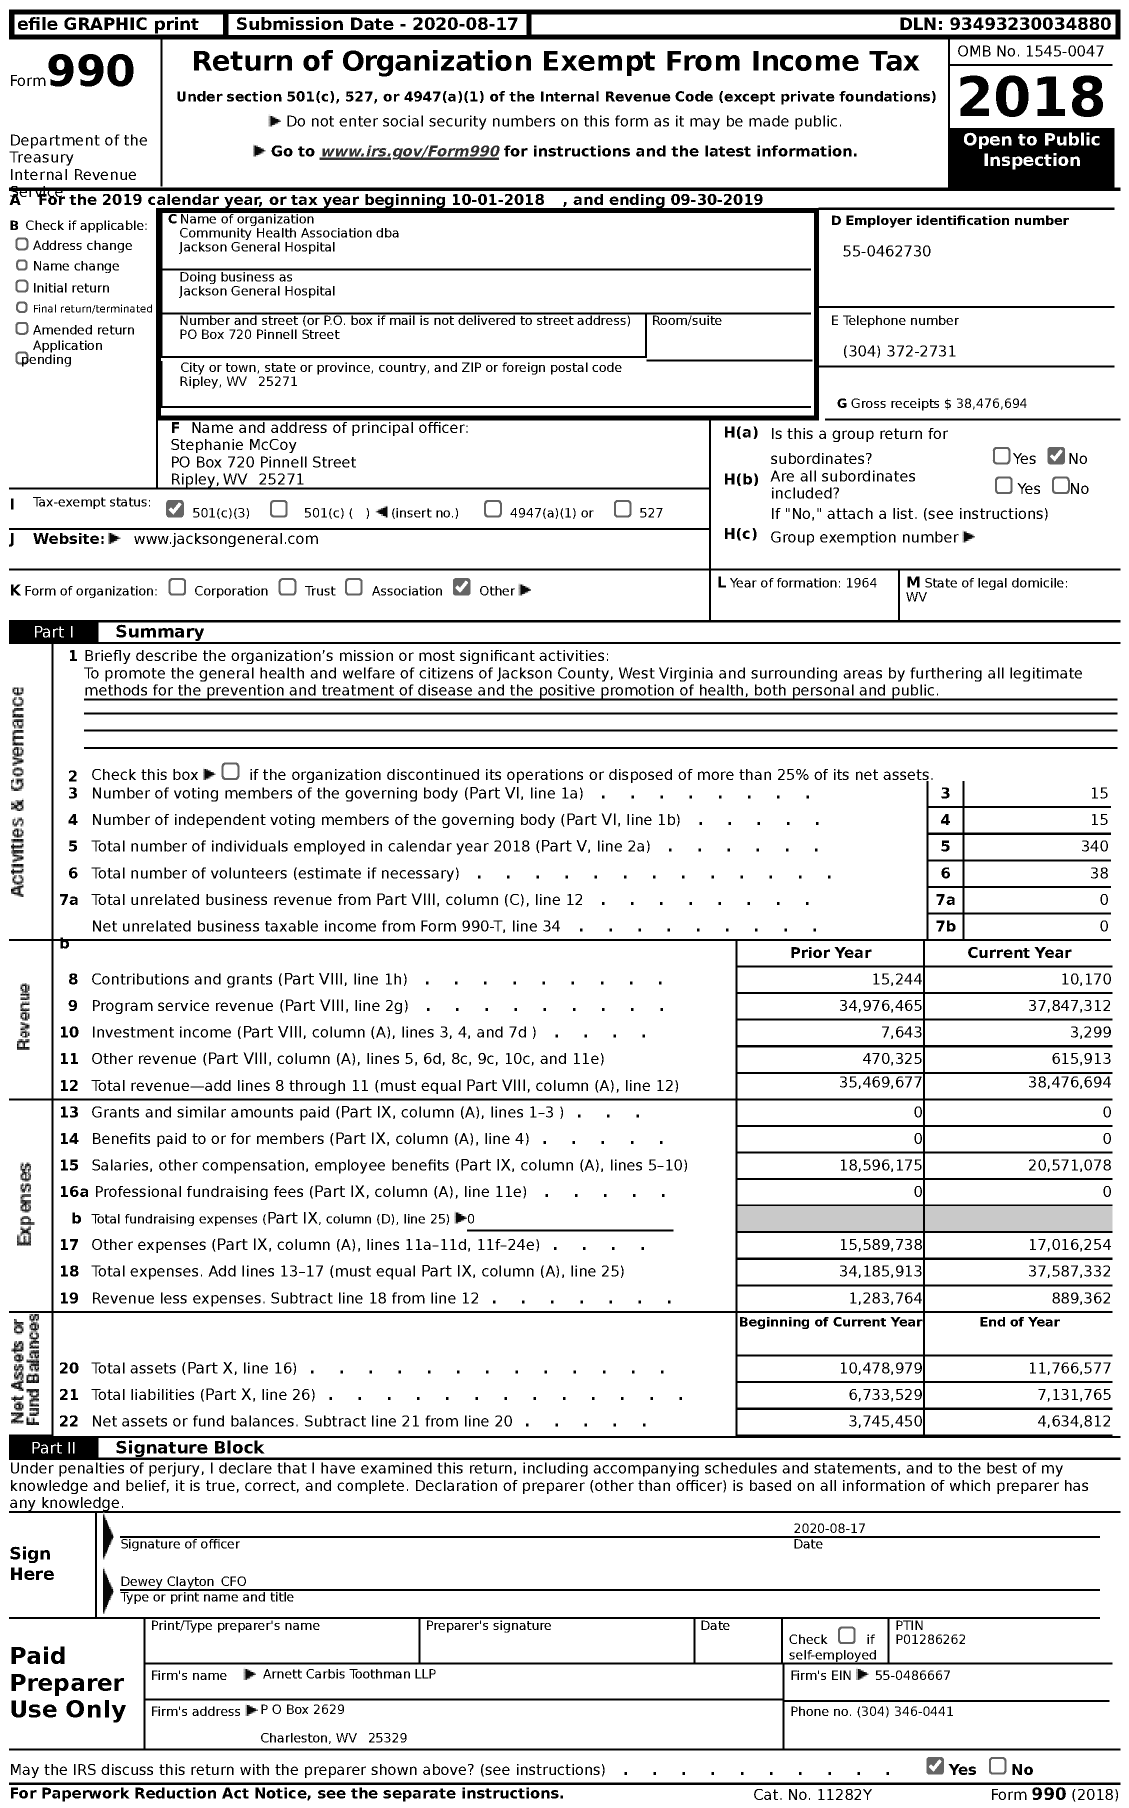 Image of first page of 2018 Form 990 for Jackson General Hospital (JGH)